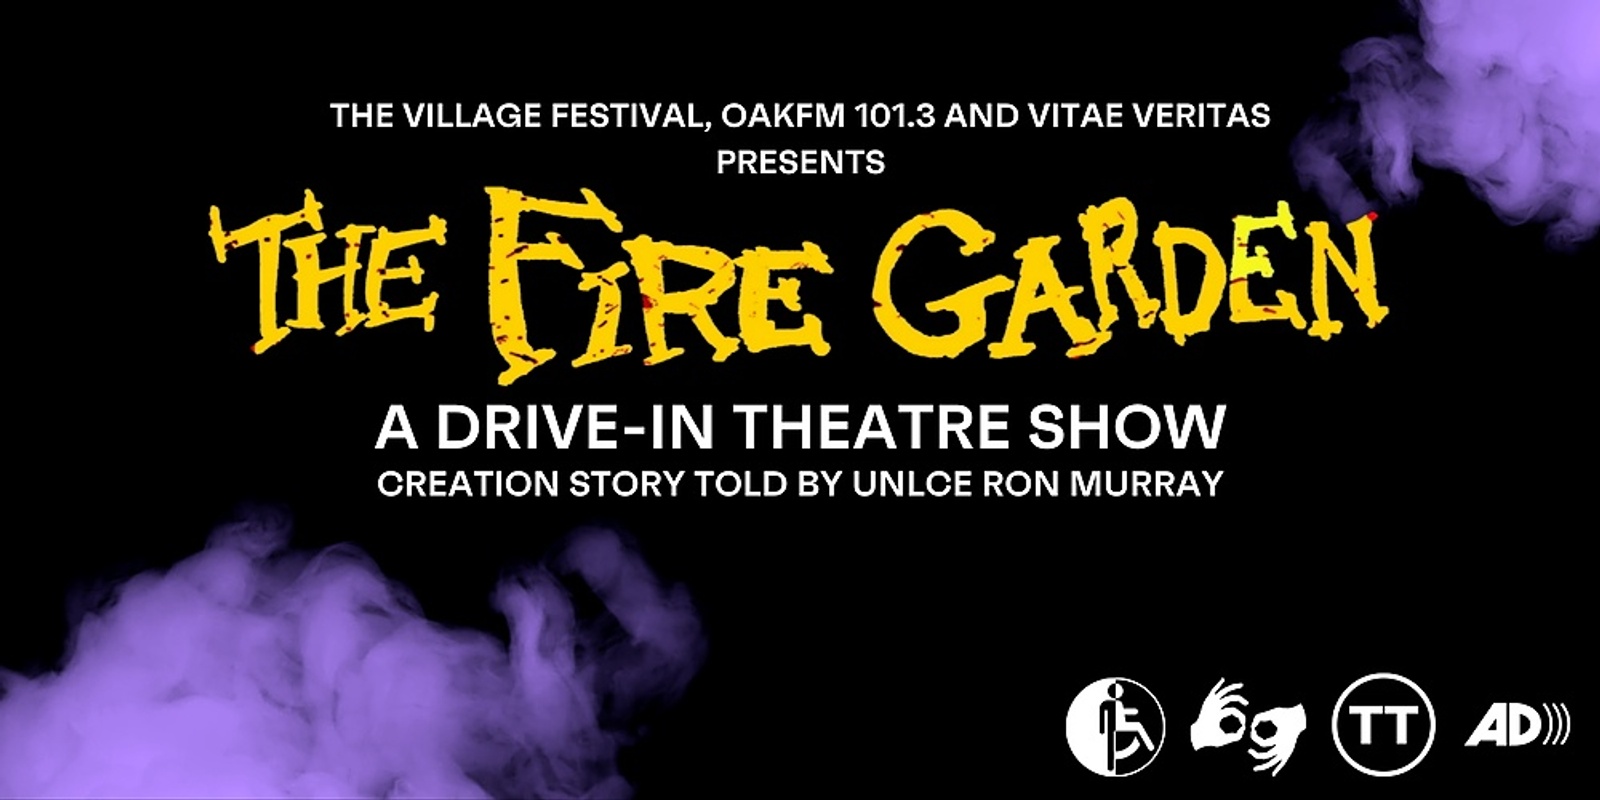 Banner image for The Fire Garden